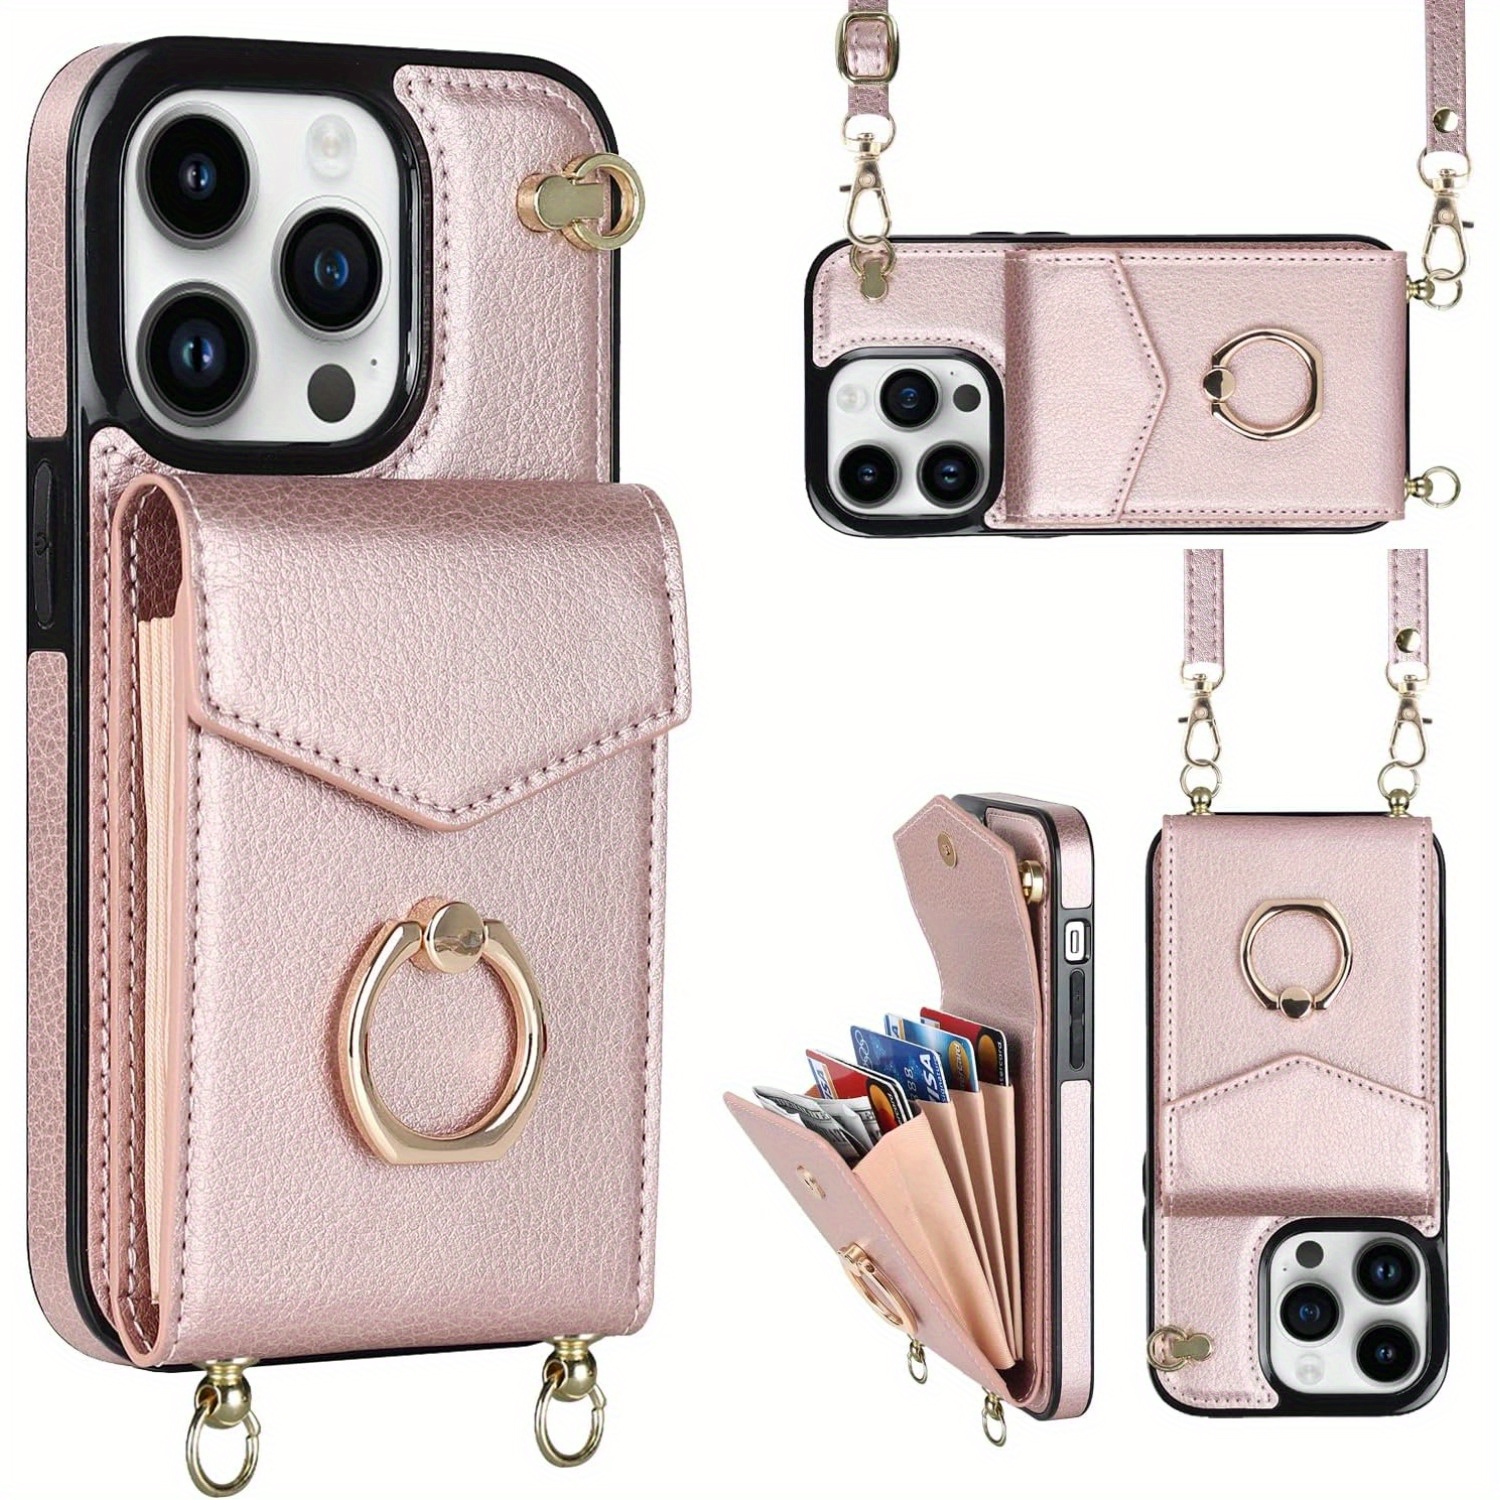 

For Iphone 15/15pro/15plus/15promax, Minimalist Wallet Case With Ring Kickstand And Shoulder Strap, Shockproof Stylish Protective Cover For Iphone